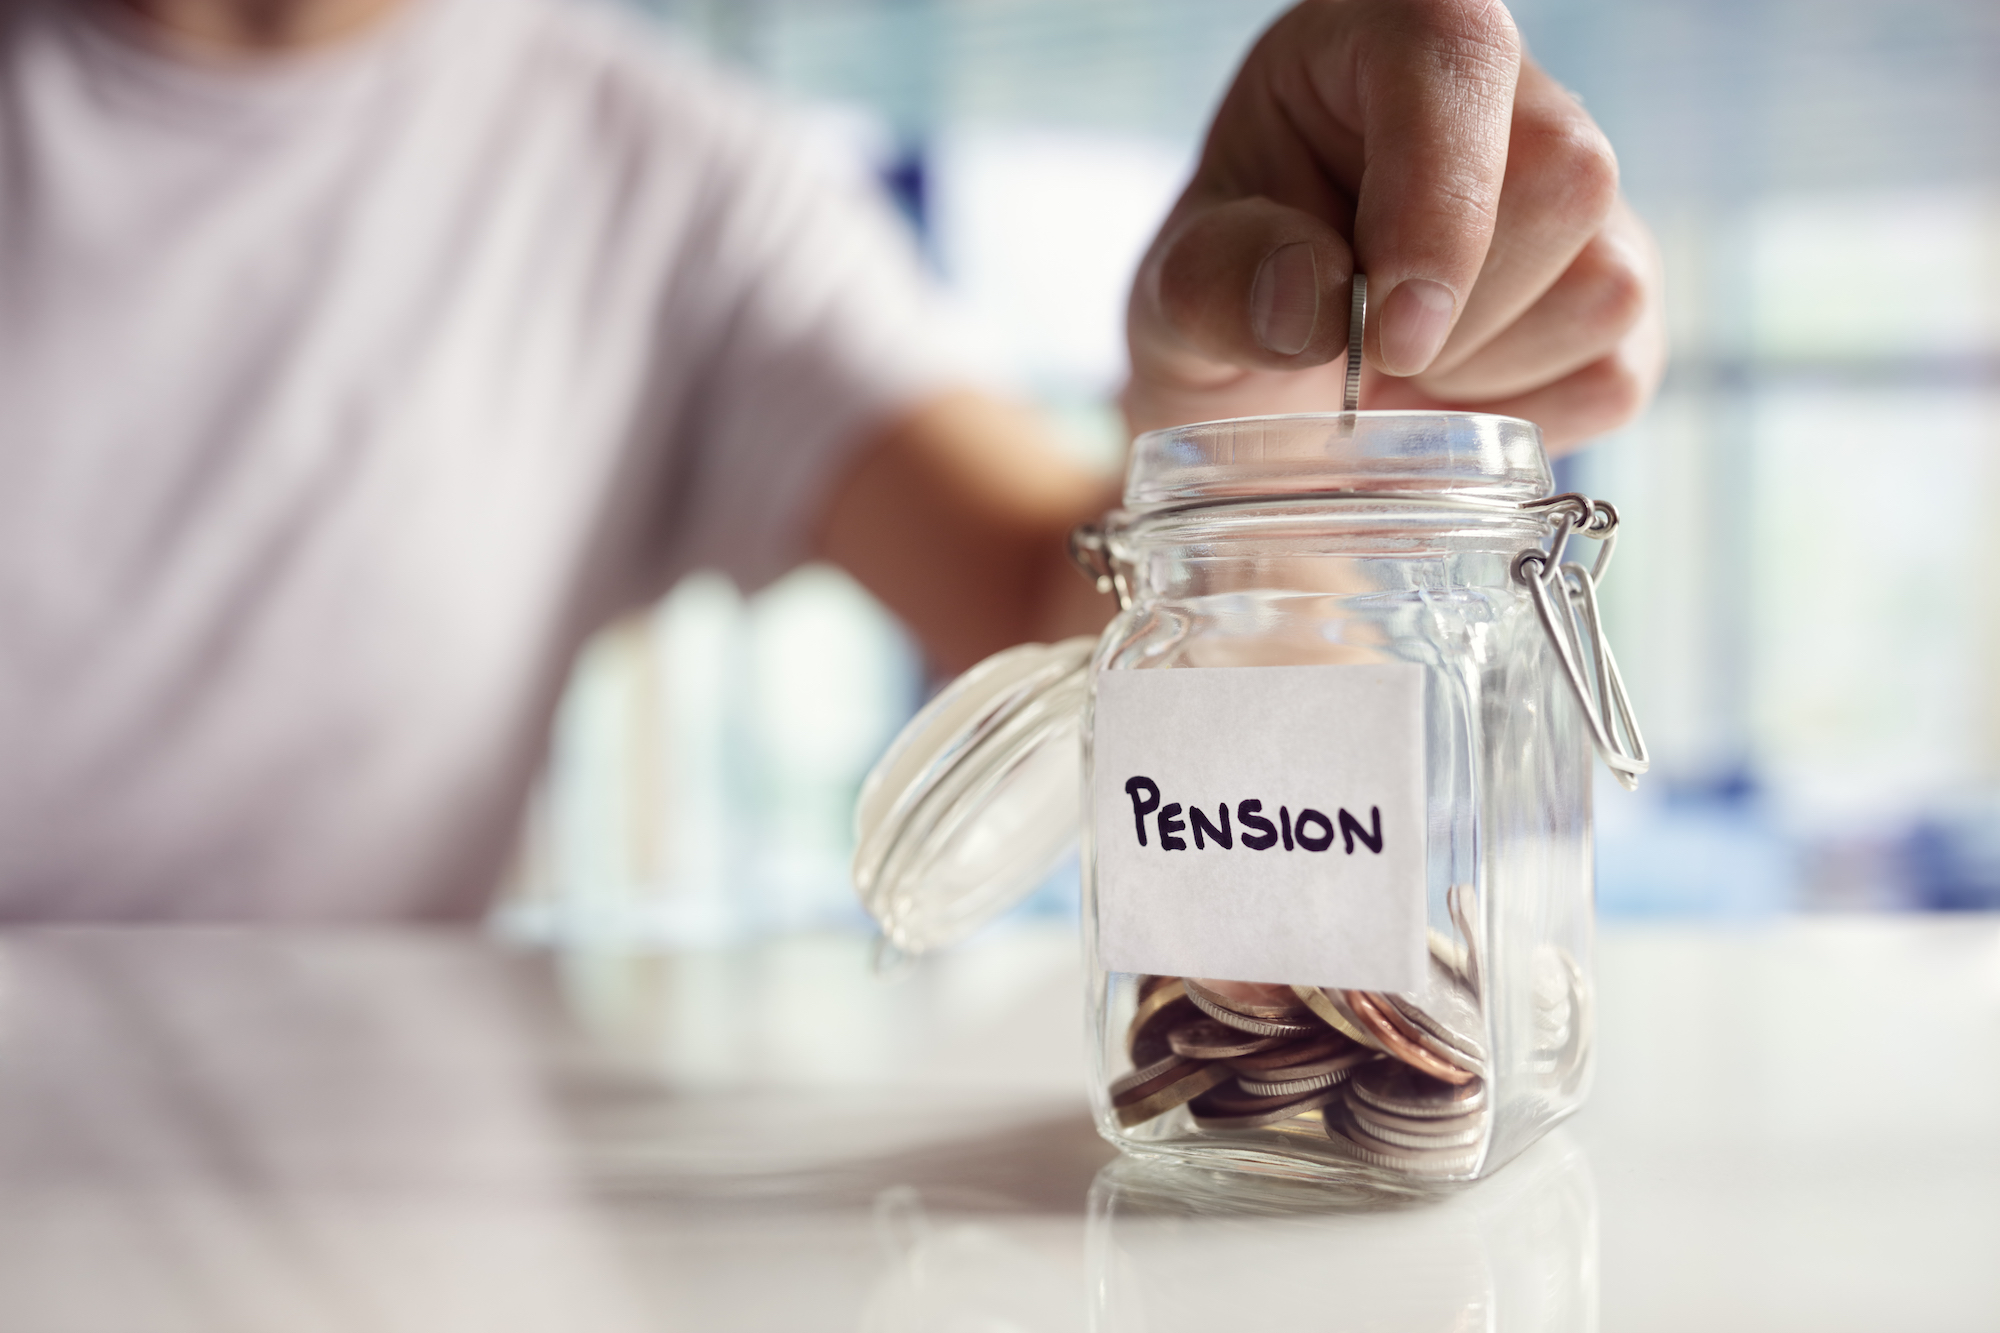 Retirement saving and pension planning